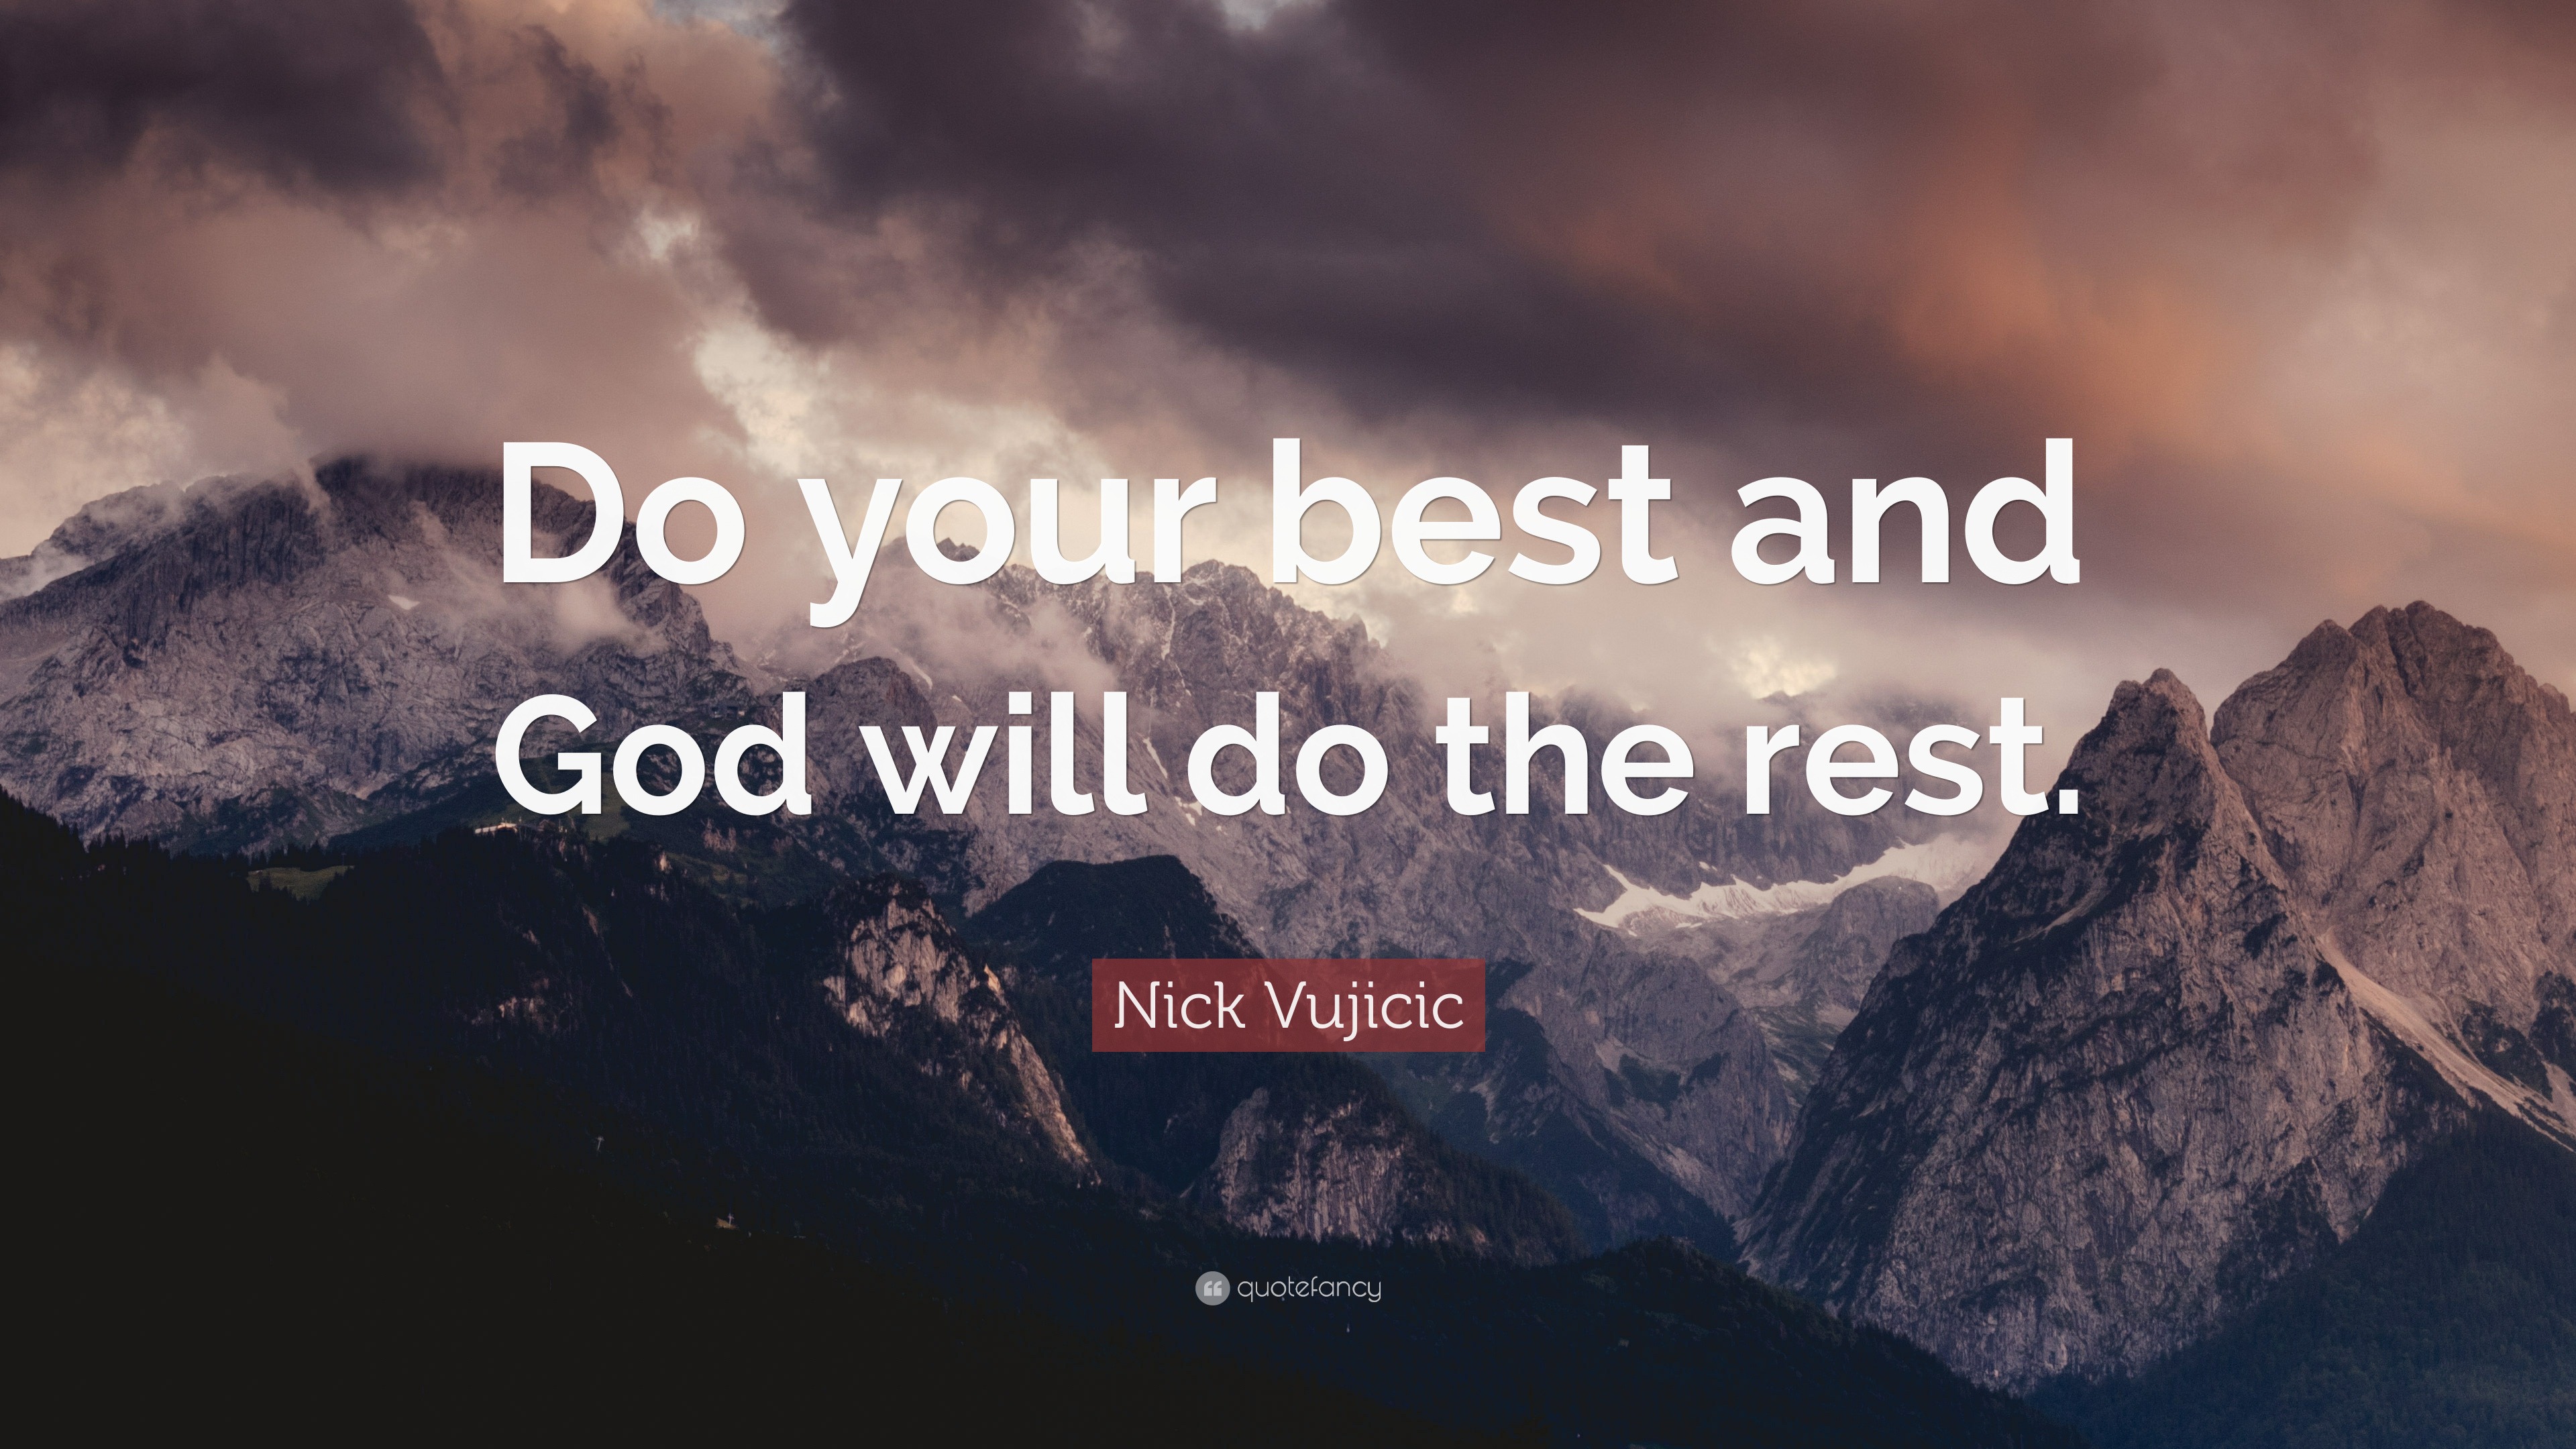 4680927 Nick Vujicic Quote Do your best and God will do the rest